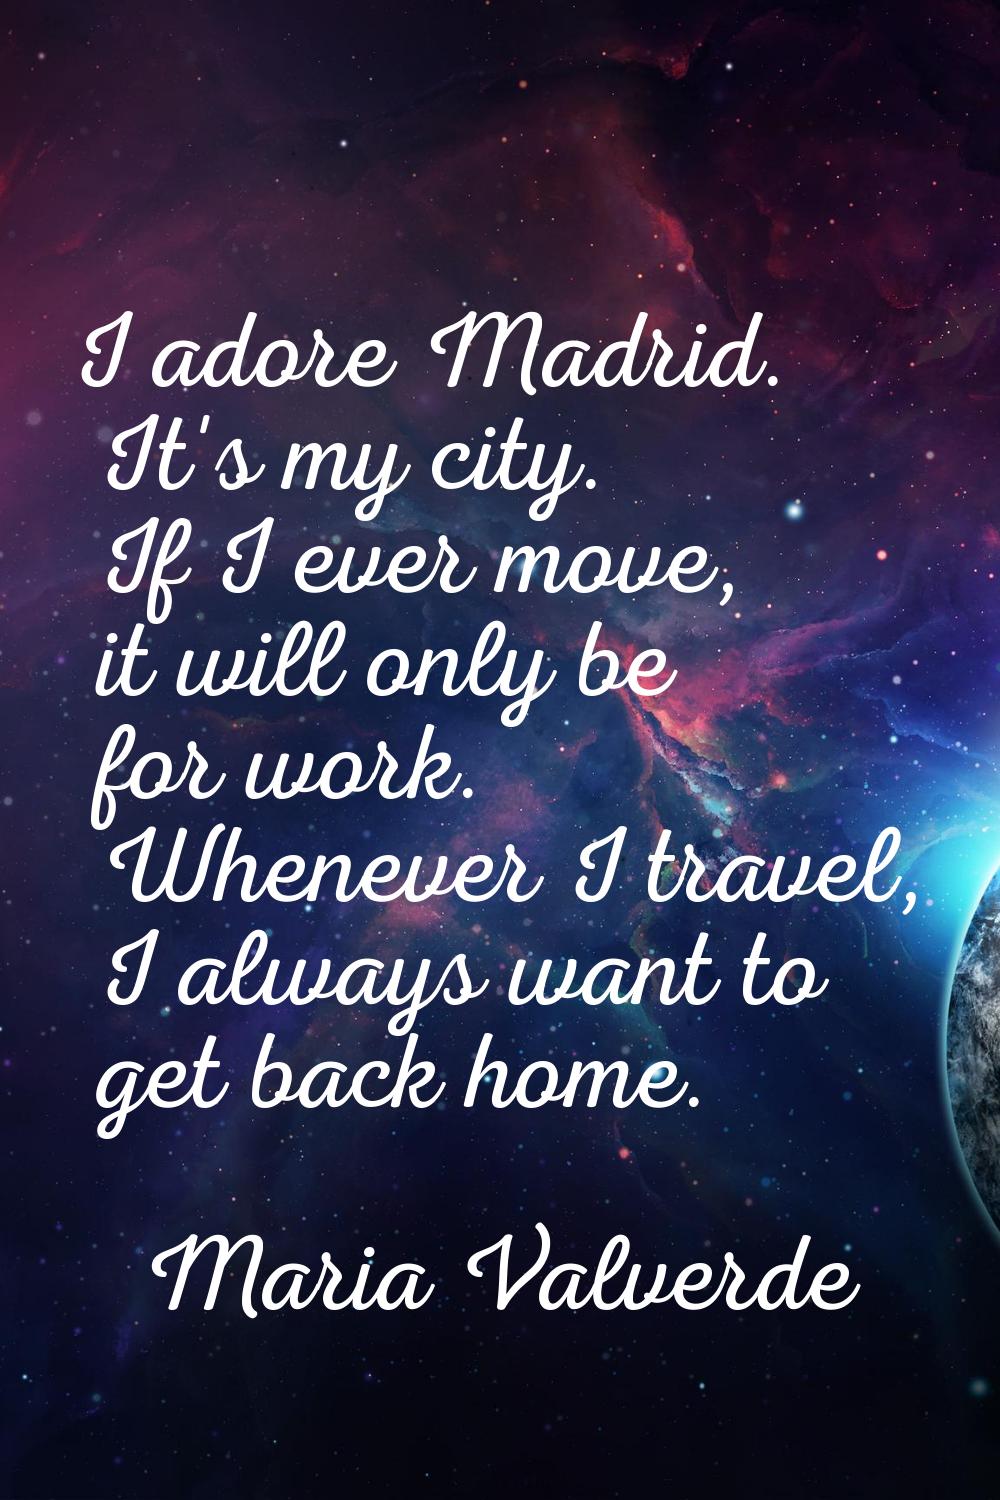 I adore Madrid. It's my city. If I ever move, it will only be for work. Whenever I travel, I always